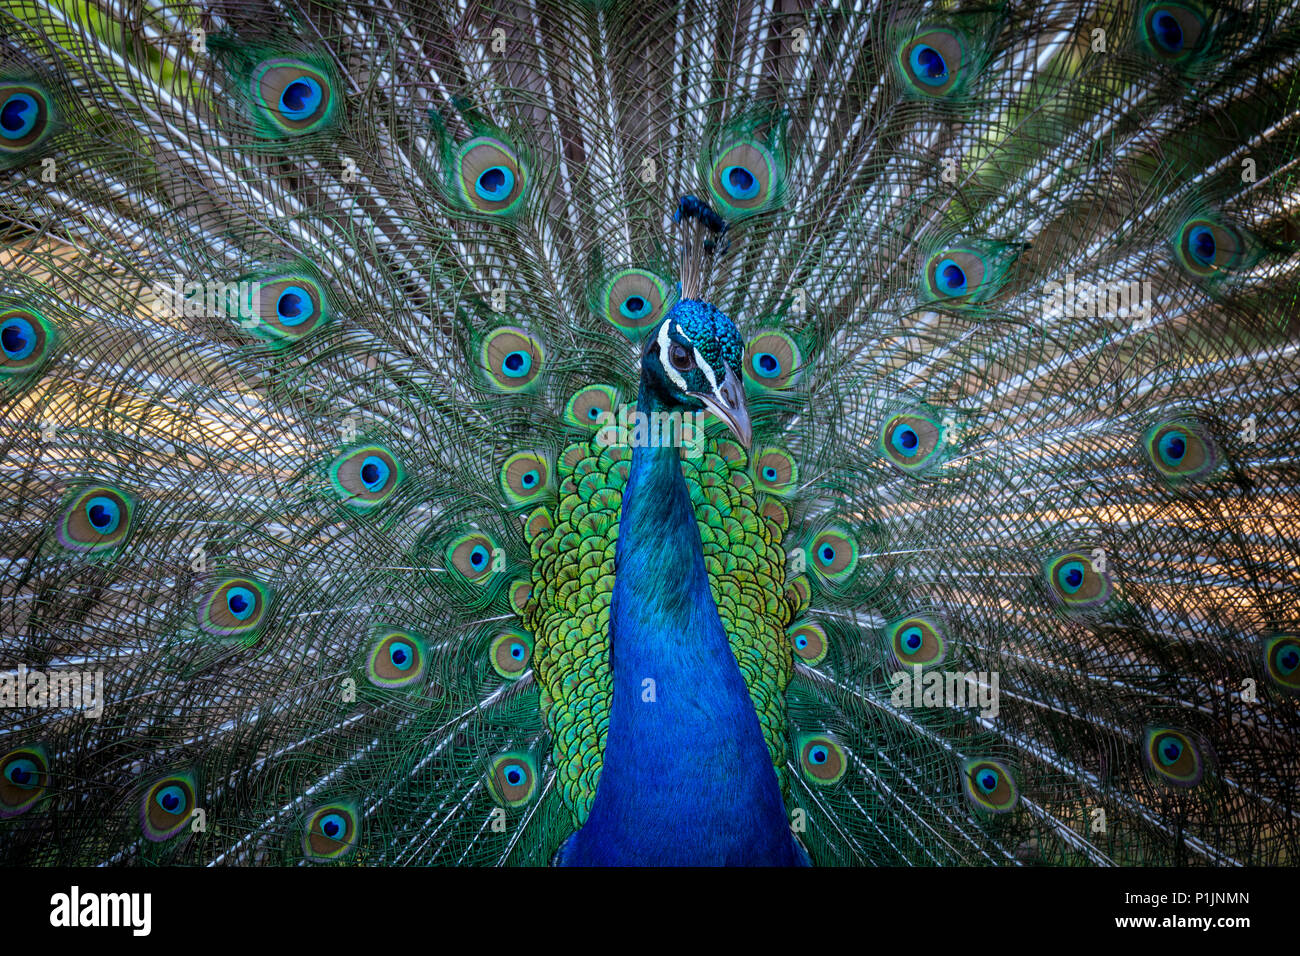 Flared feathers of a peacock Stock Photo